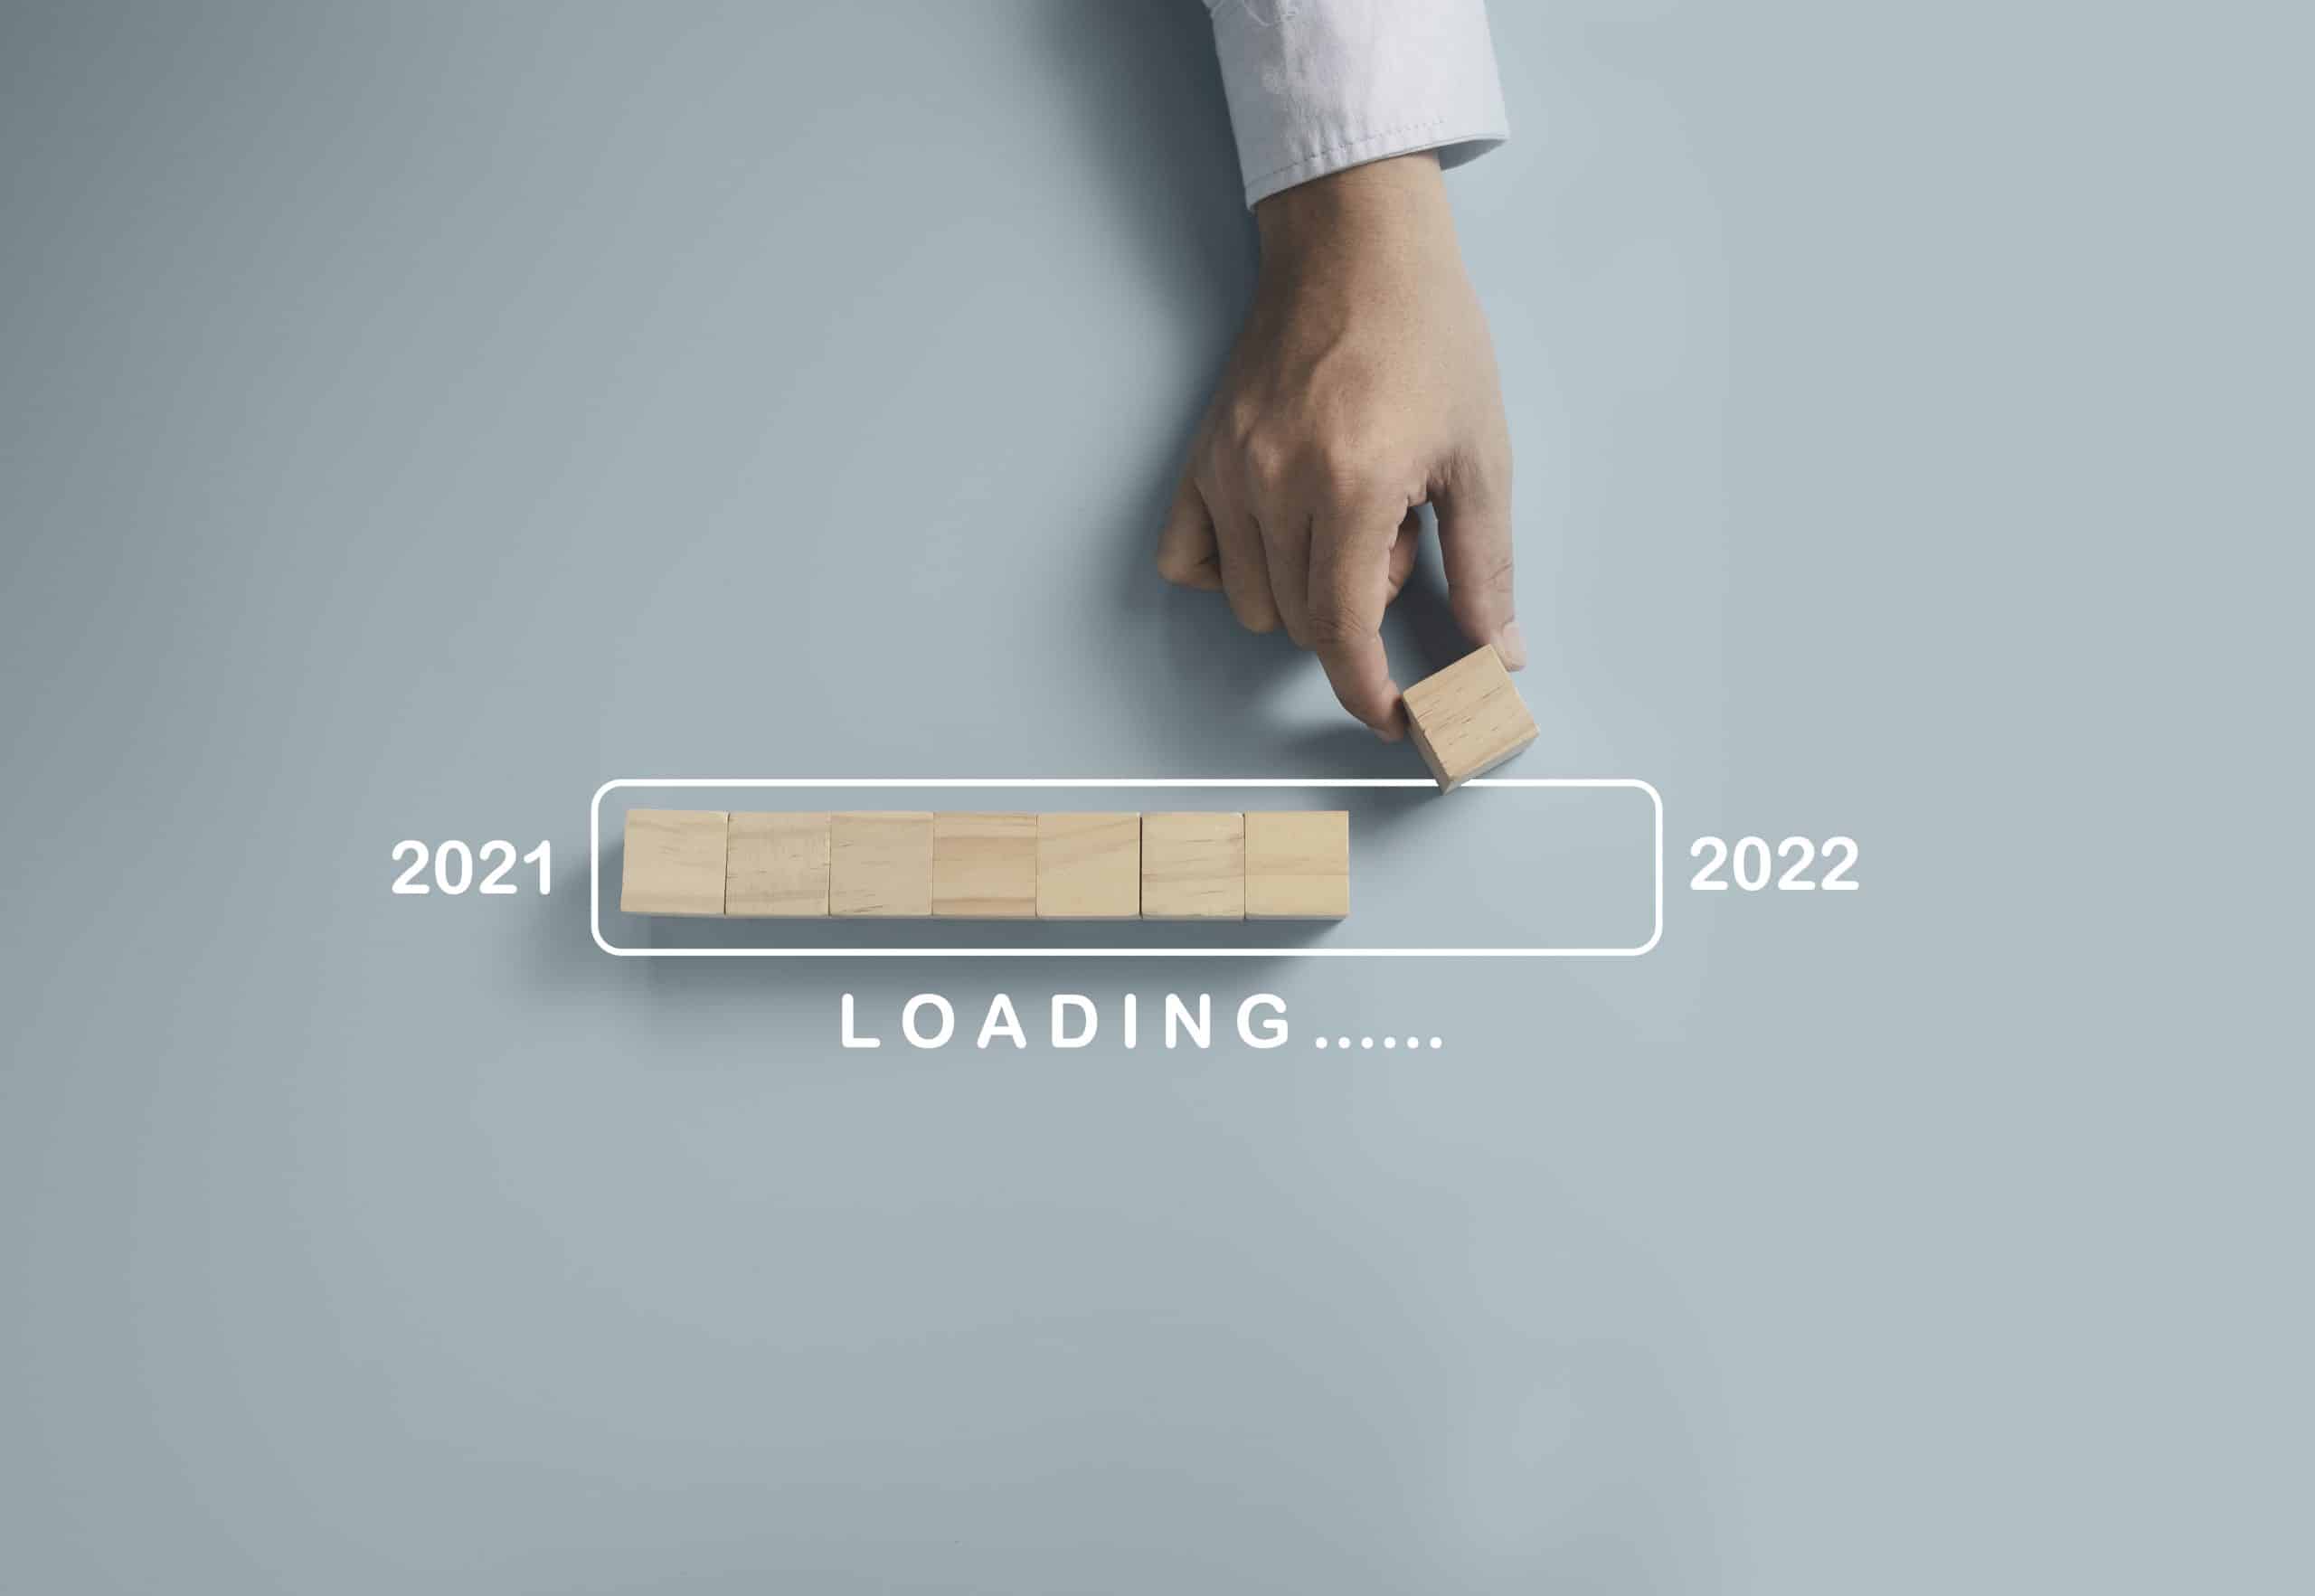 Vroozi's 2022 procurement predictions include operational efficiency, the switch to automation and more.